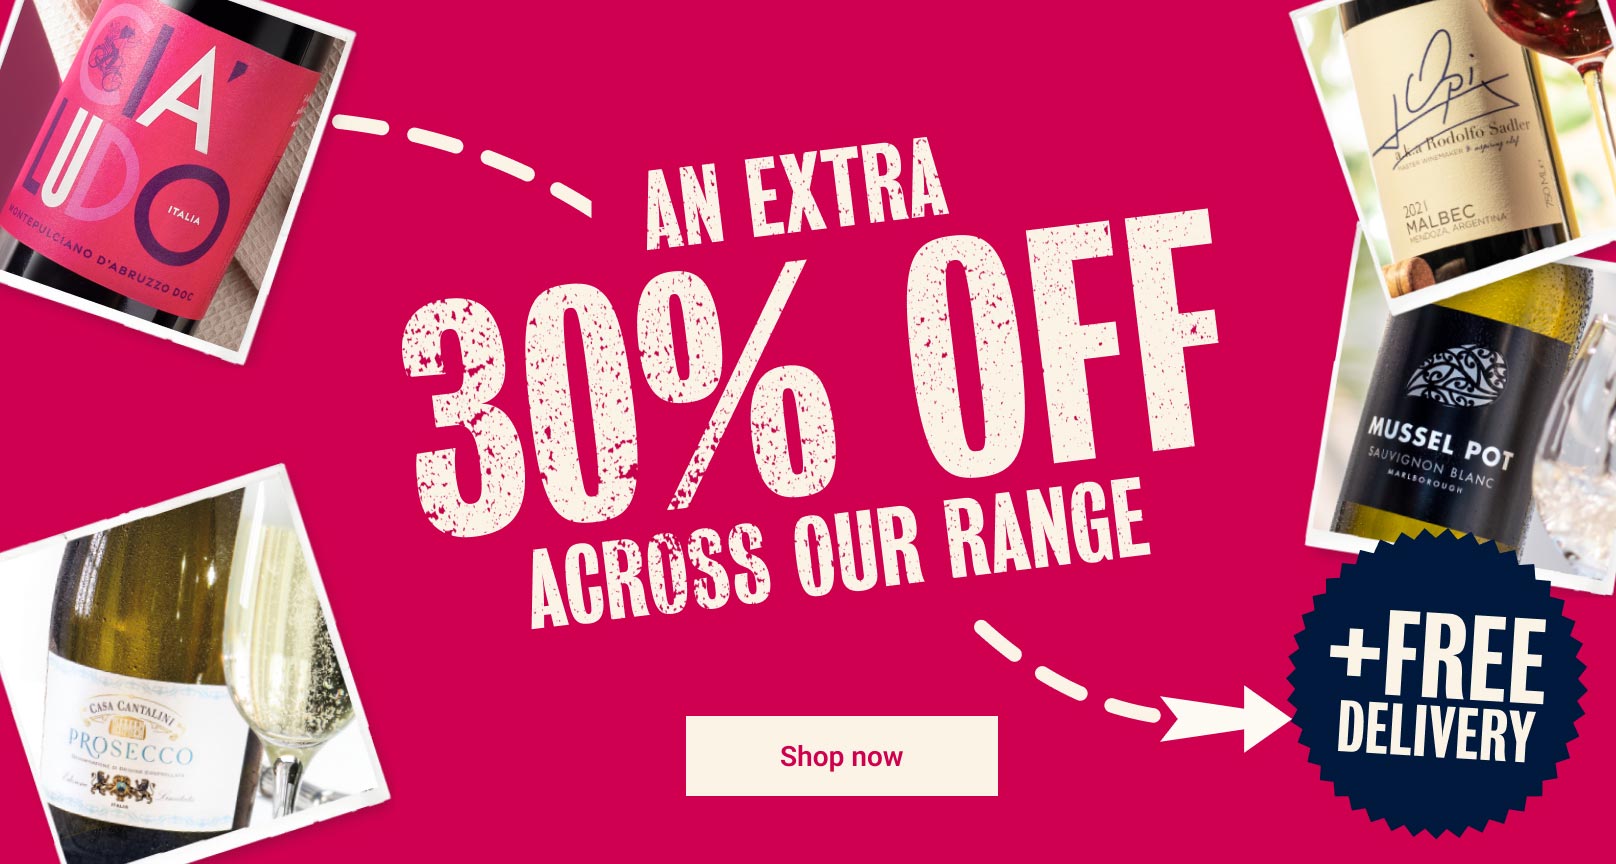 An extra 30% off + Free Delivery - LW